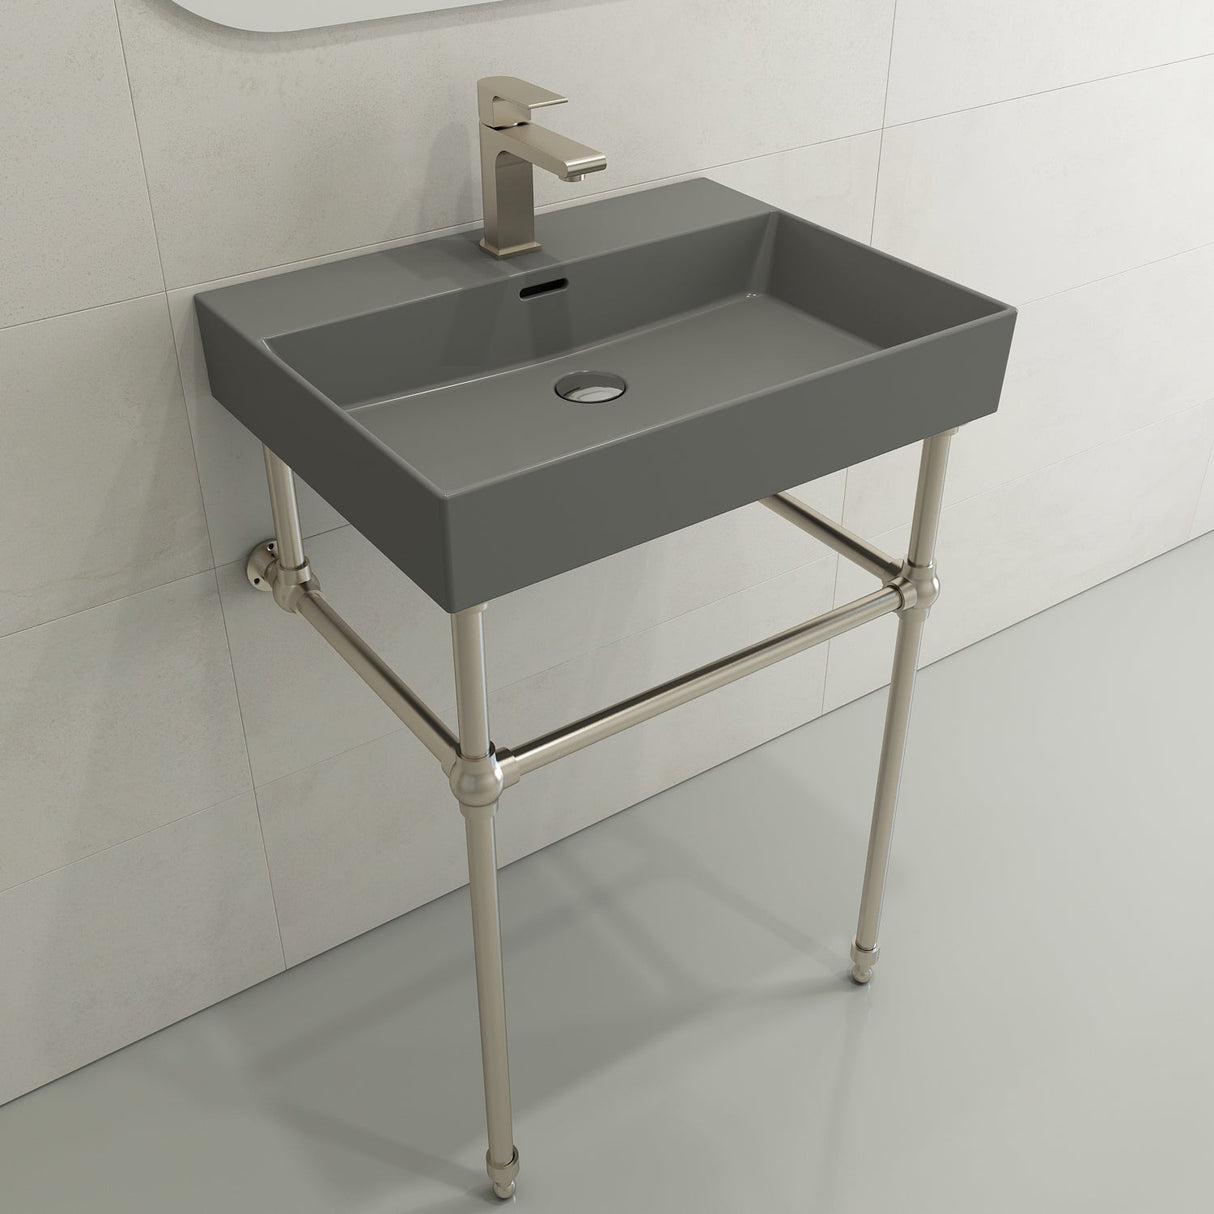 BOCCHI 1376-006-0126 Milano Wall-Mounted Sink Fireclay 24 in. 1-Hole with Overflow in Matte Gray